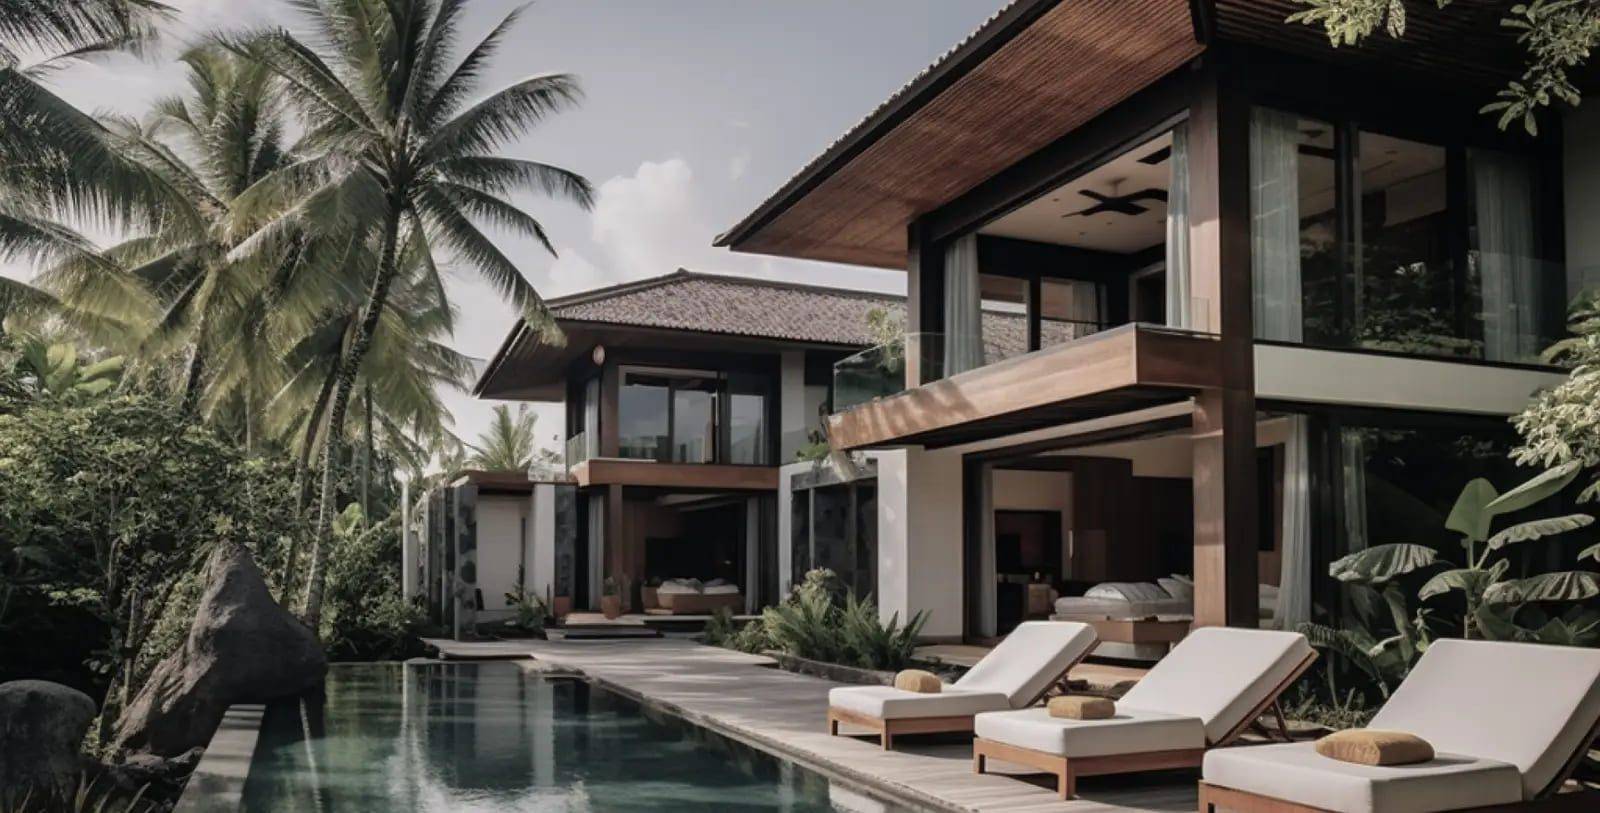 Modern luxury villa with a private pool surrounded by lush tropical foliage, highlighting the opulence of property taxation in Indonesia